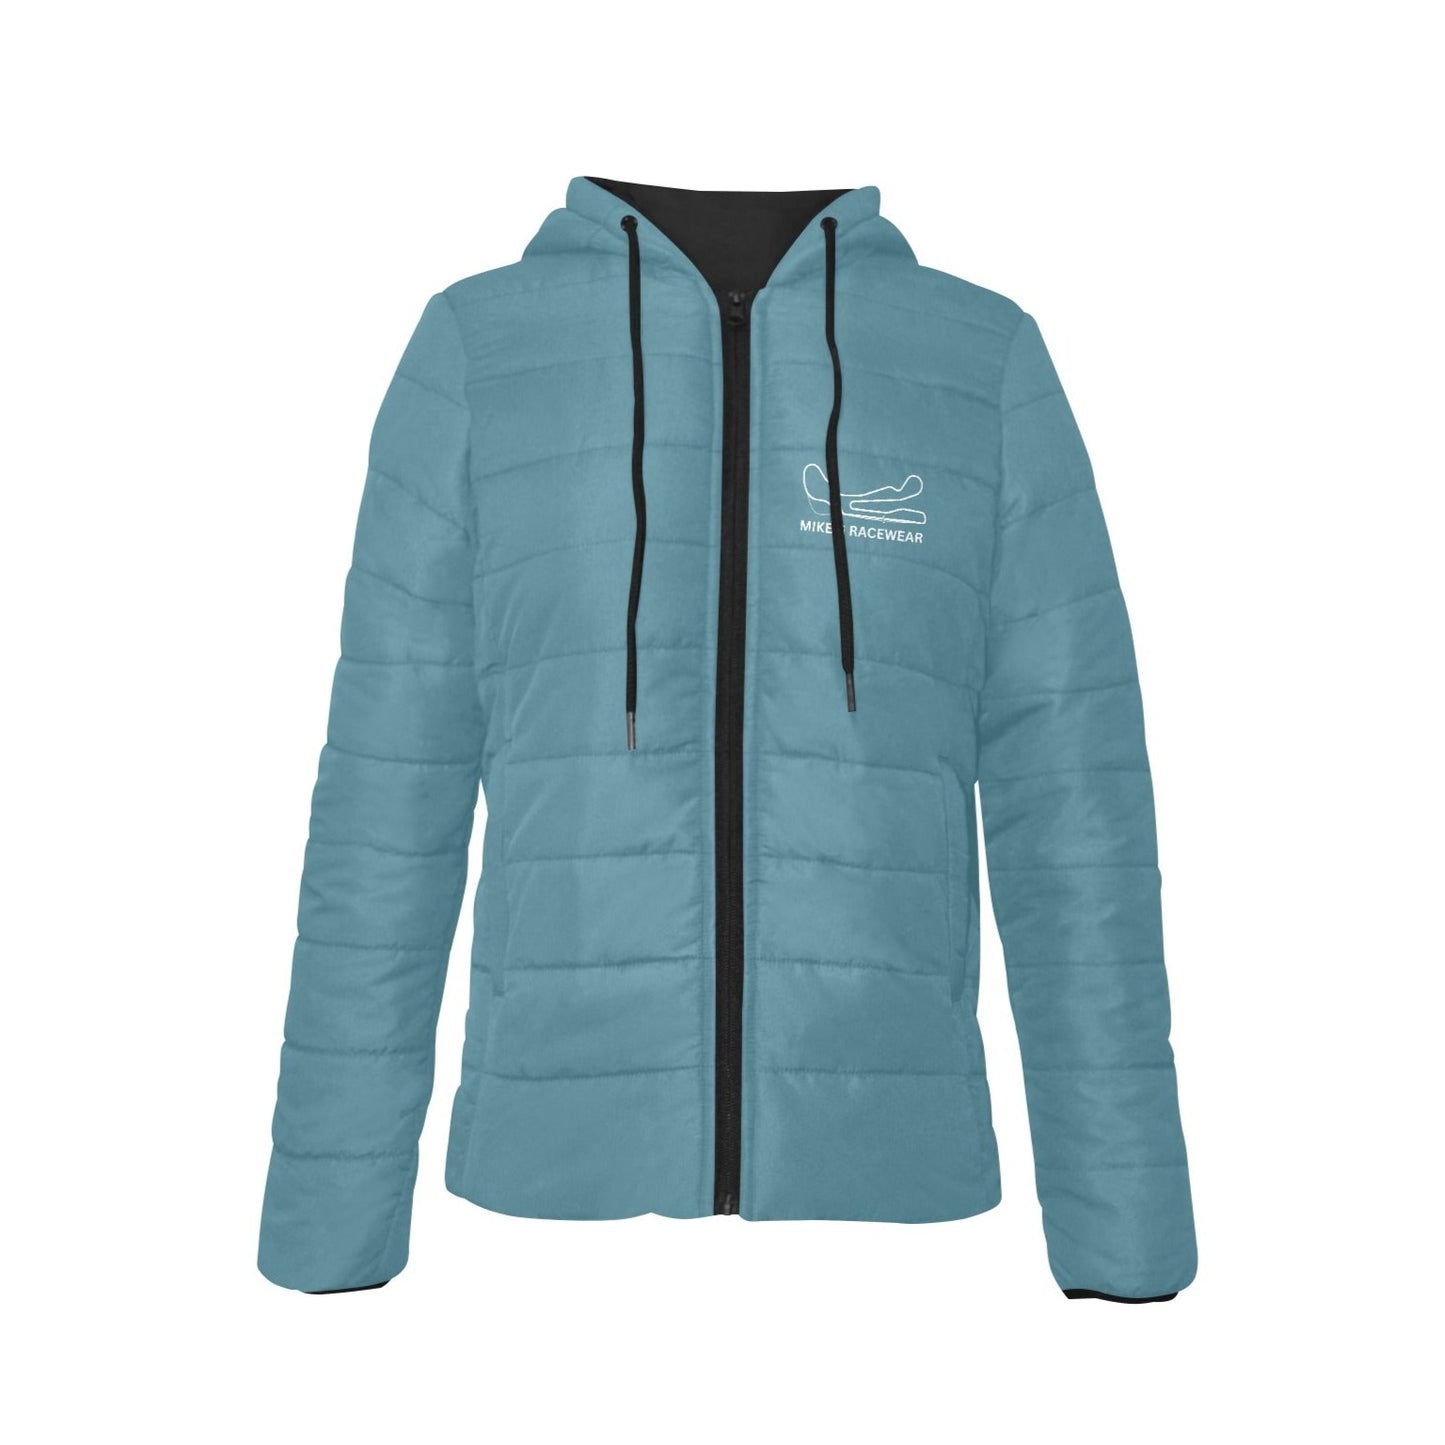 CIRCUITO MIKE G - Women's Hooded puffer jacket - Teal